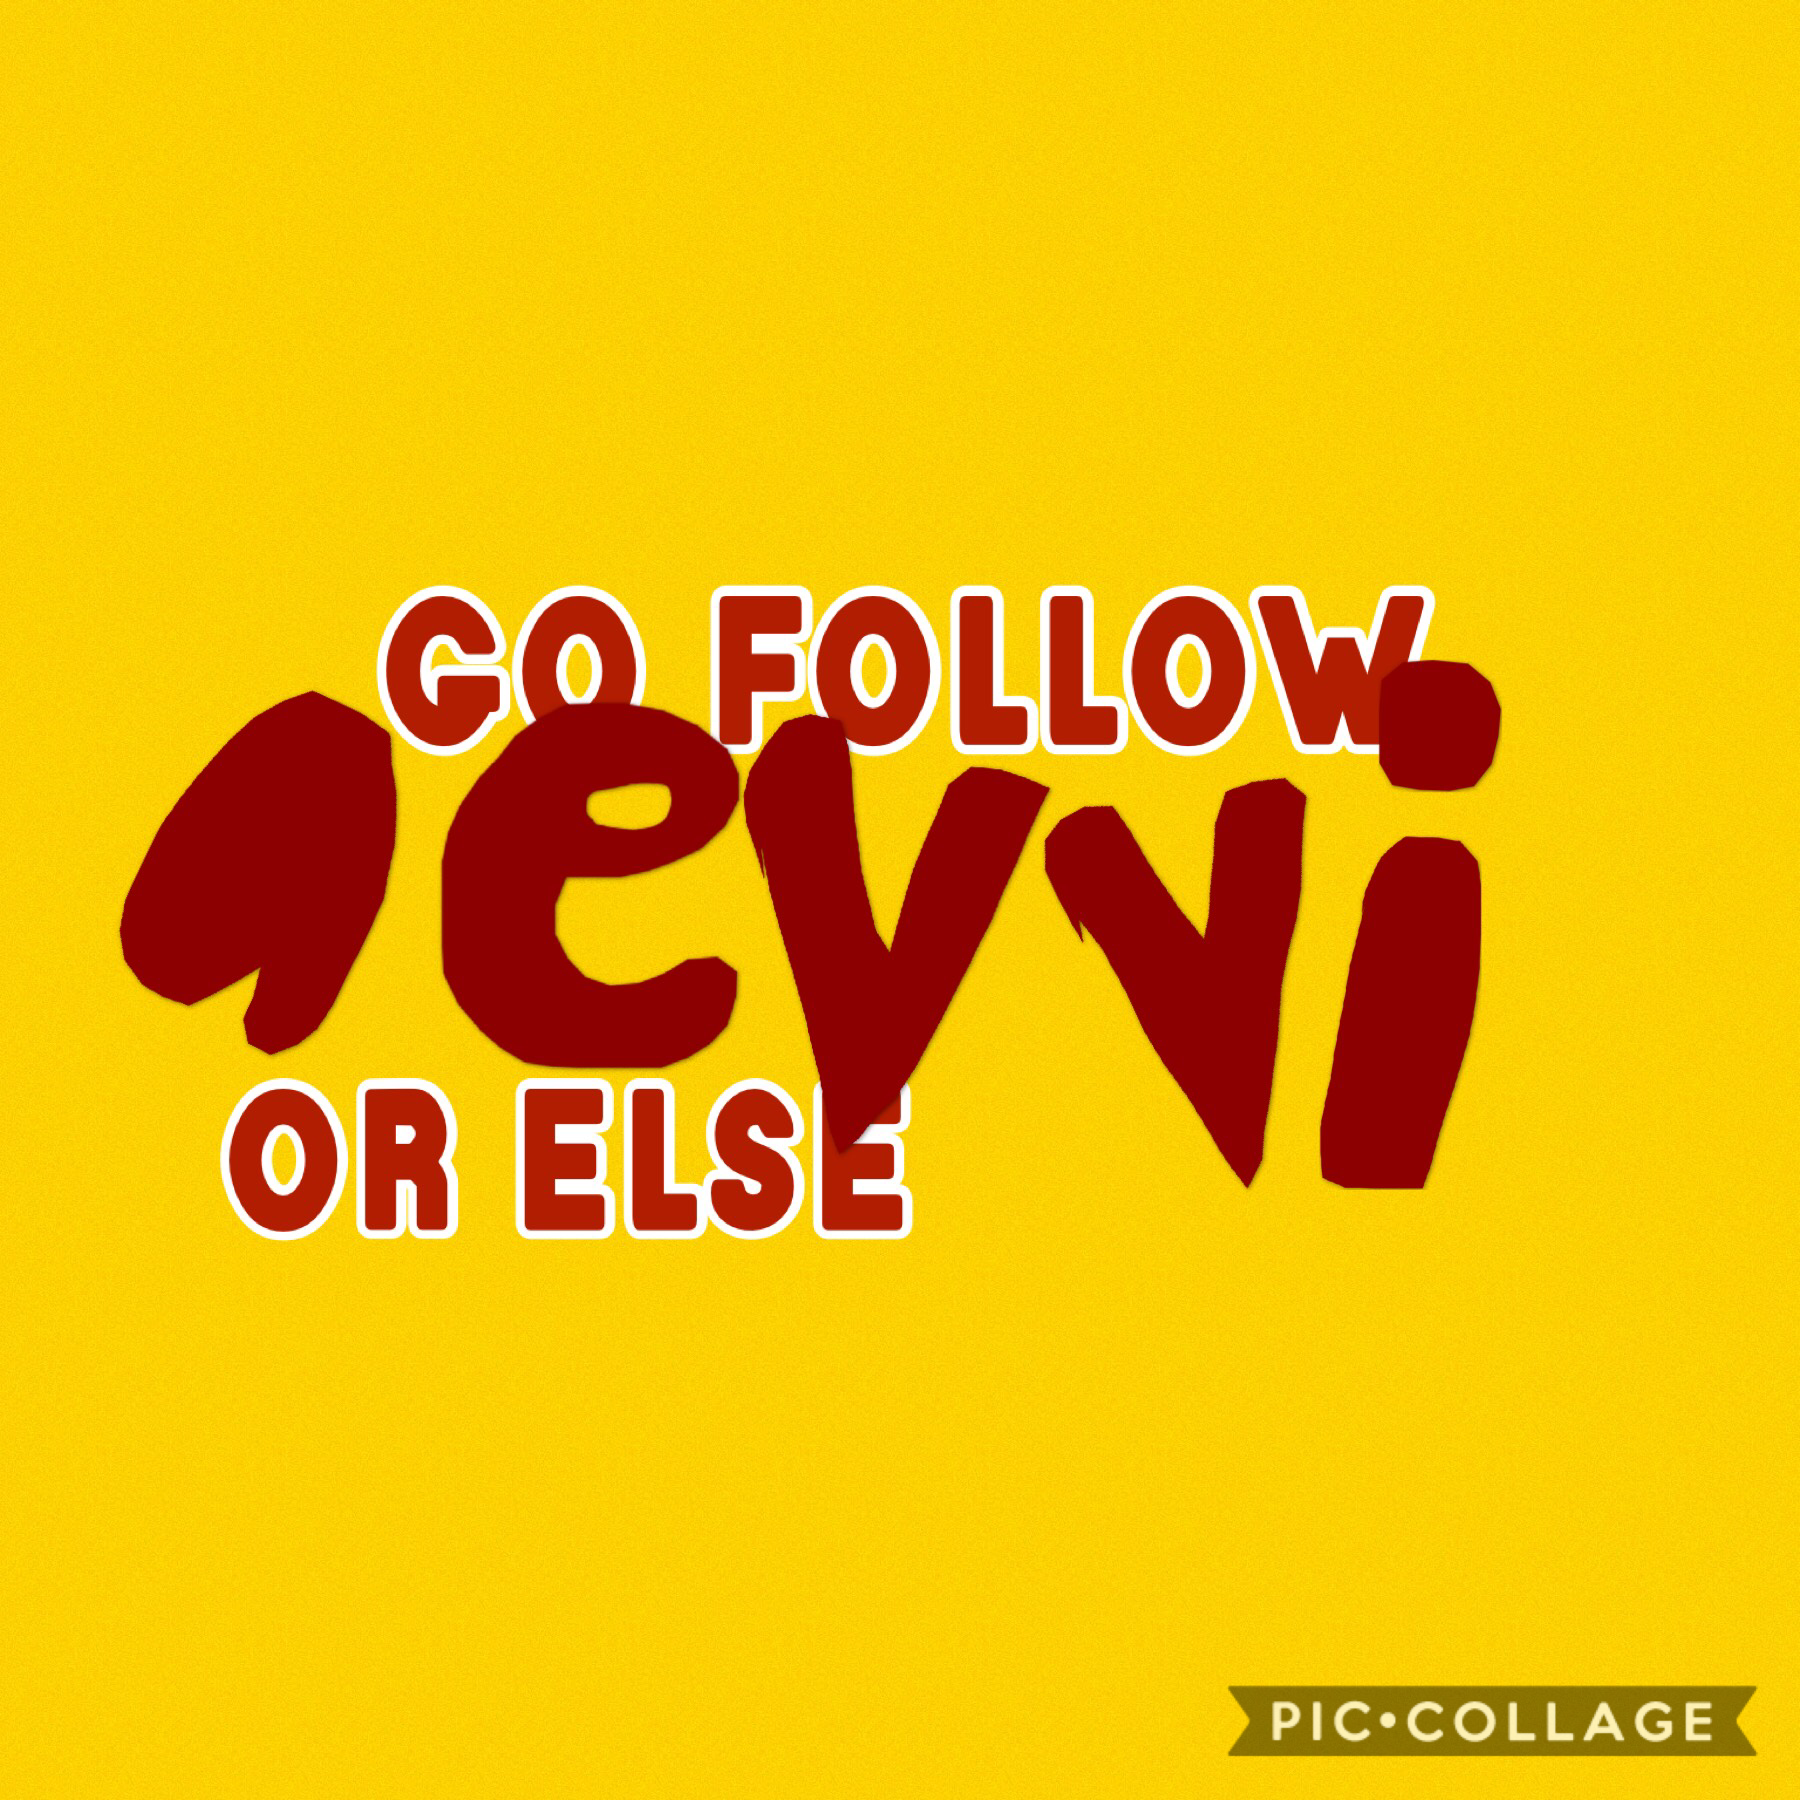 🌙GO FOLLOW @aevvi!🌙 SERIOUSLY GO 🌙 The users collages are just, wow.🌙 I said I would post a decent collage, and this is sorta the color scheme for it, I’ll post it later today🌙 THE PET STORE HAD NO CATS 🌙
#PCONLY
#GO
#FOLLOW
#@aevii
#HASHTAG
#CATS
#DECENT